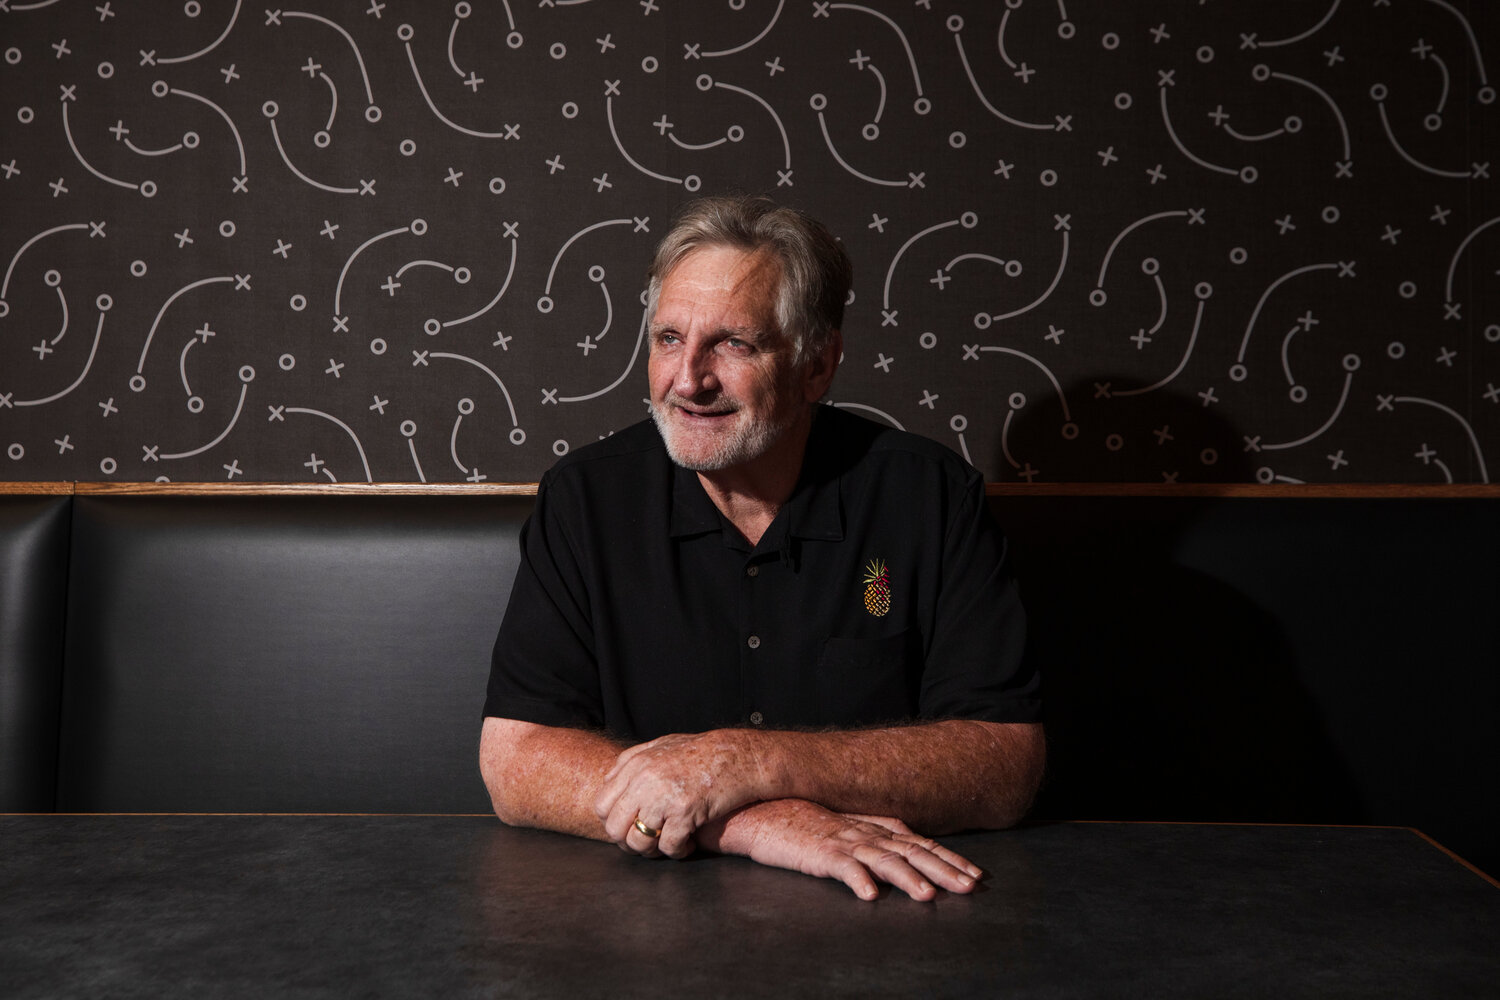 Bob Baumhower played football at Alabama for Paul “Bear” Bryant before being drafted to the Miami Dolphins in the ‘70s. As a
restaurateur, he is credited with introducing the state of Alabama to chicken wings.